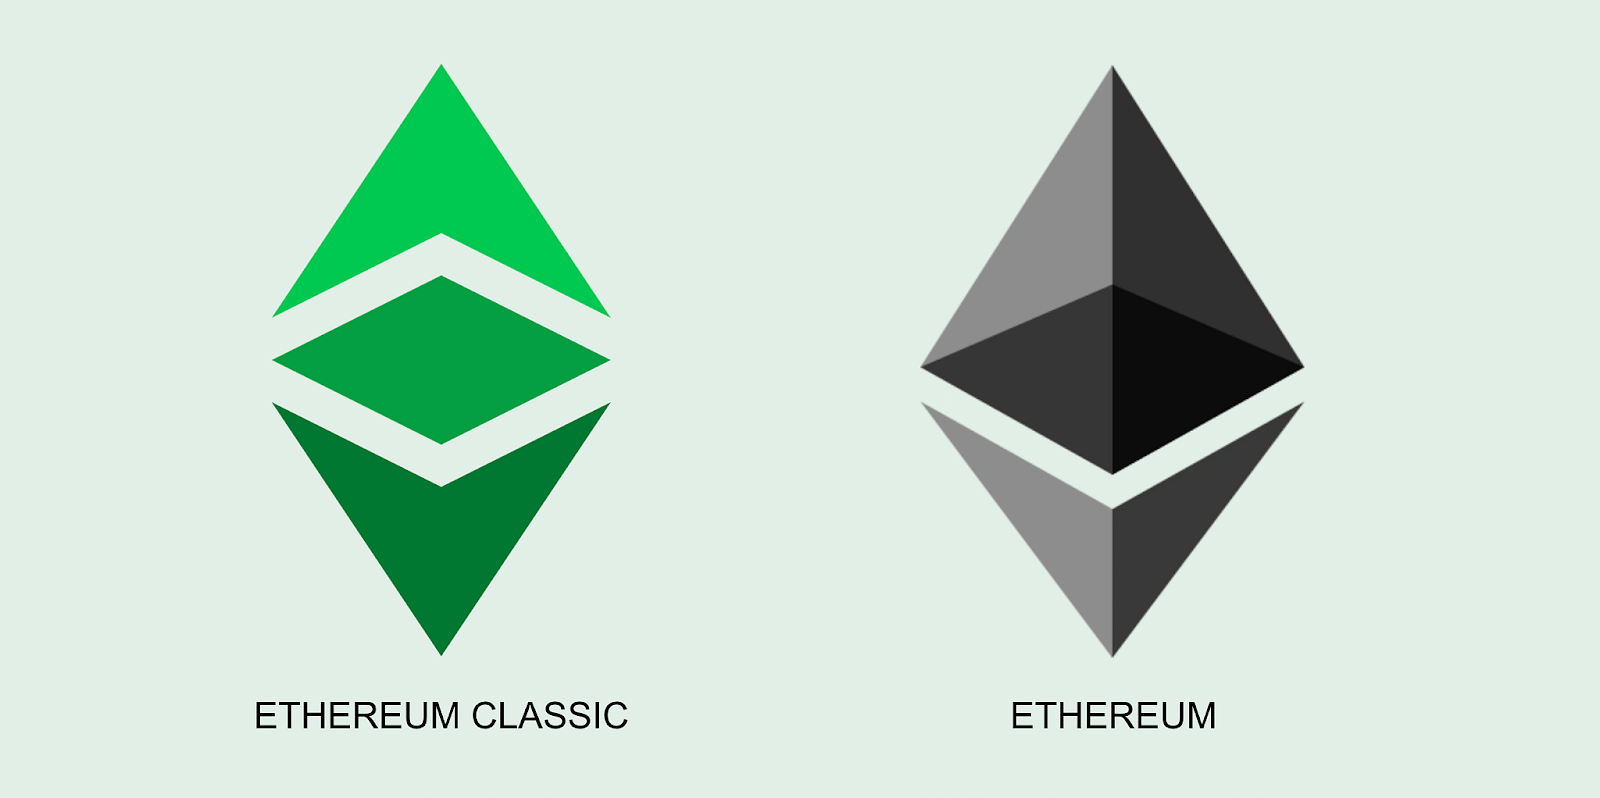 Cryptocurrency ETH and ETC: similarities and differences